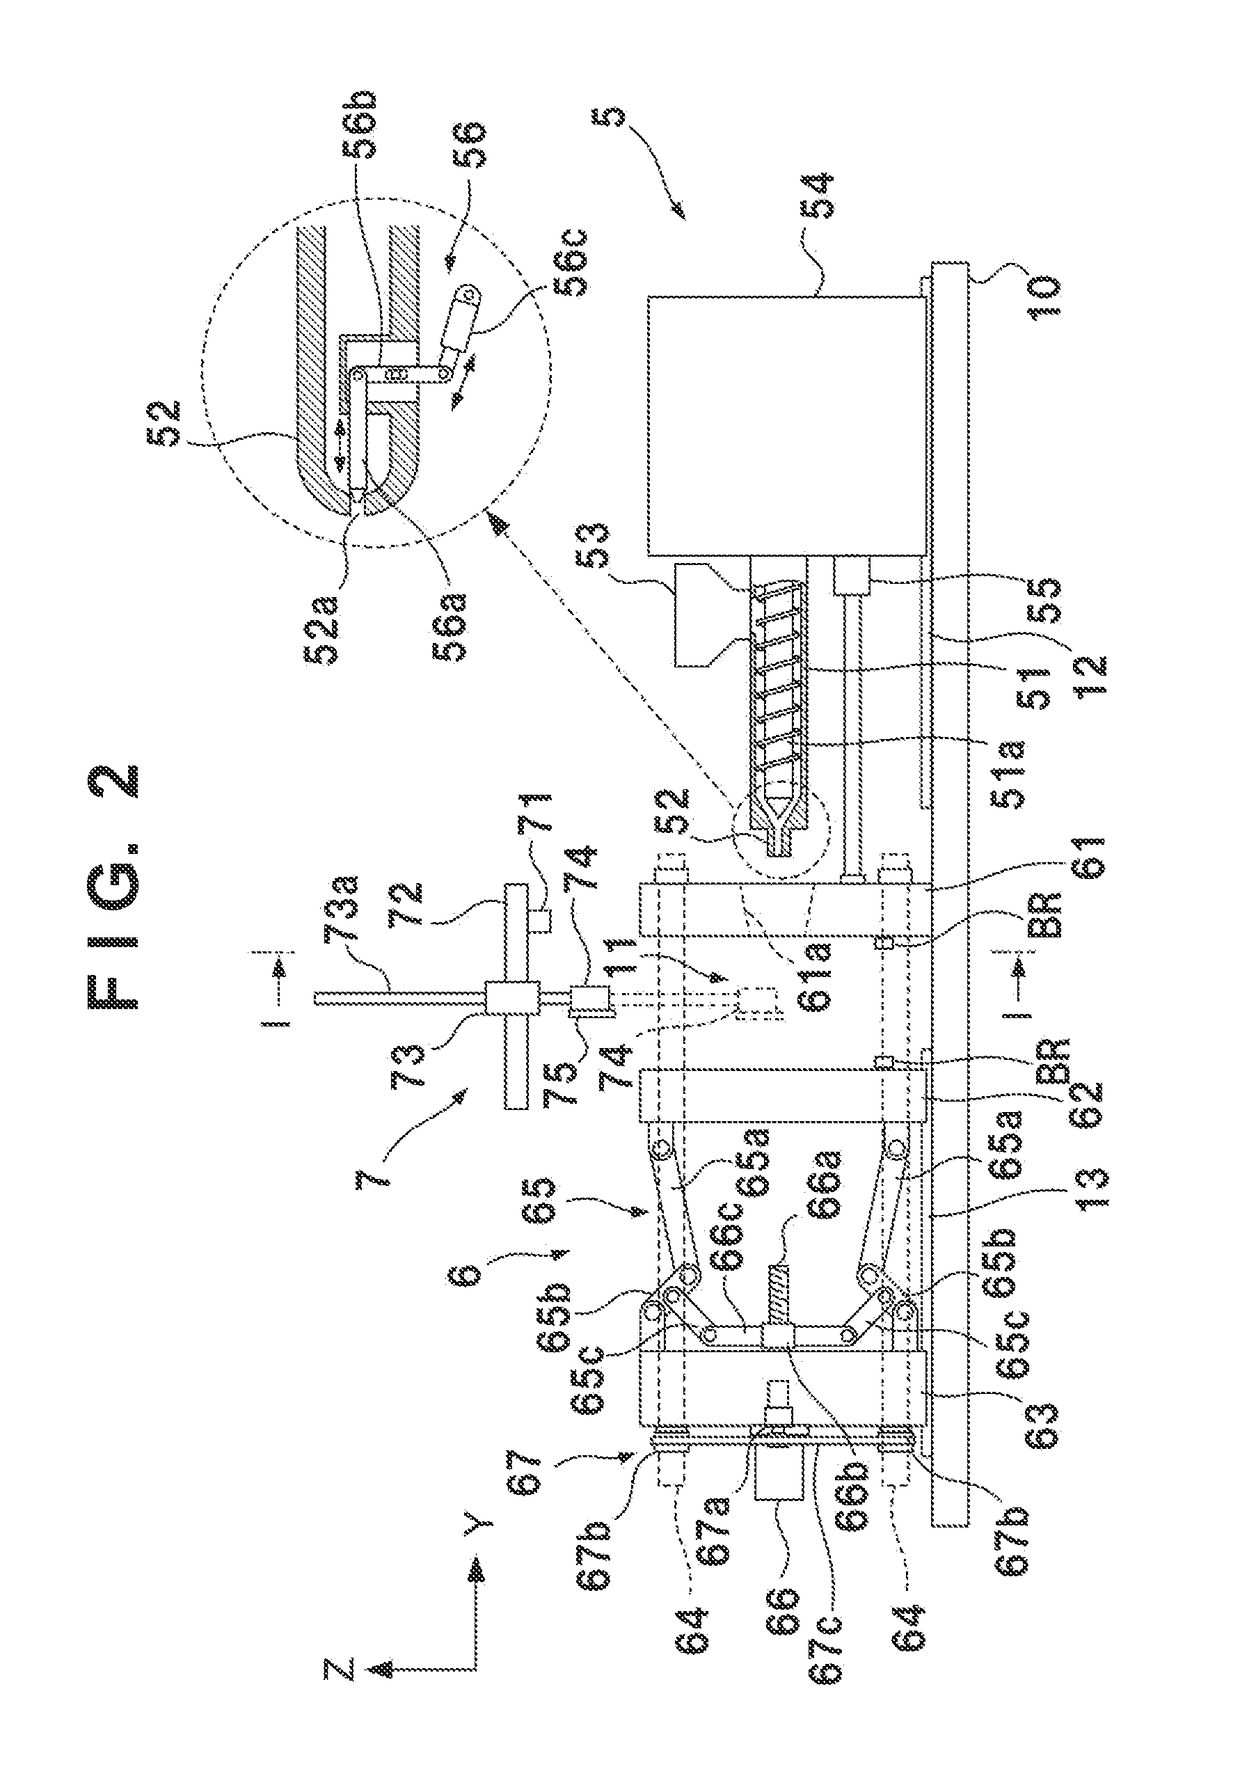 Manufacturing method and injection molding system